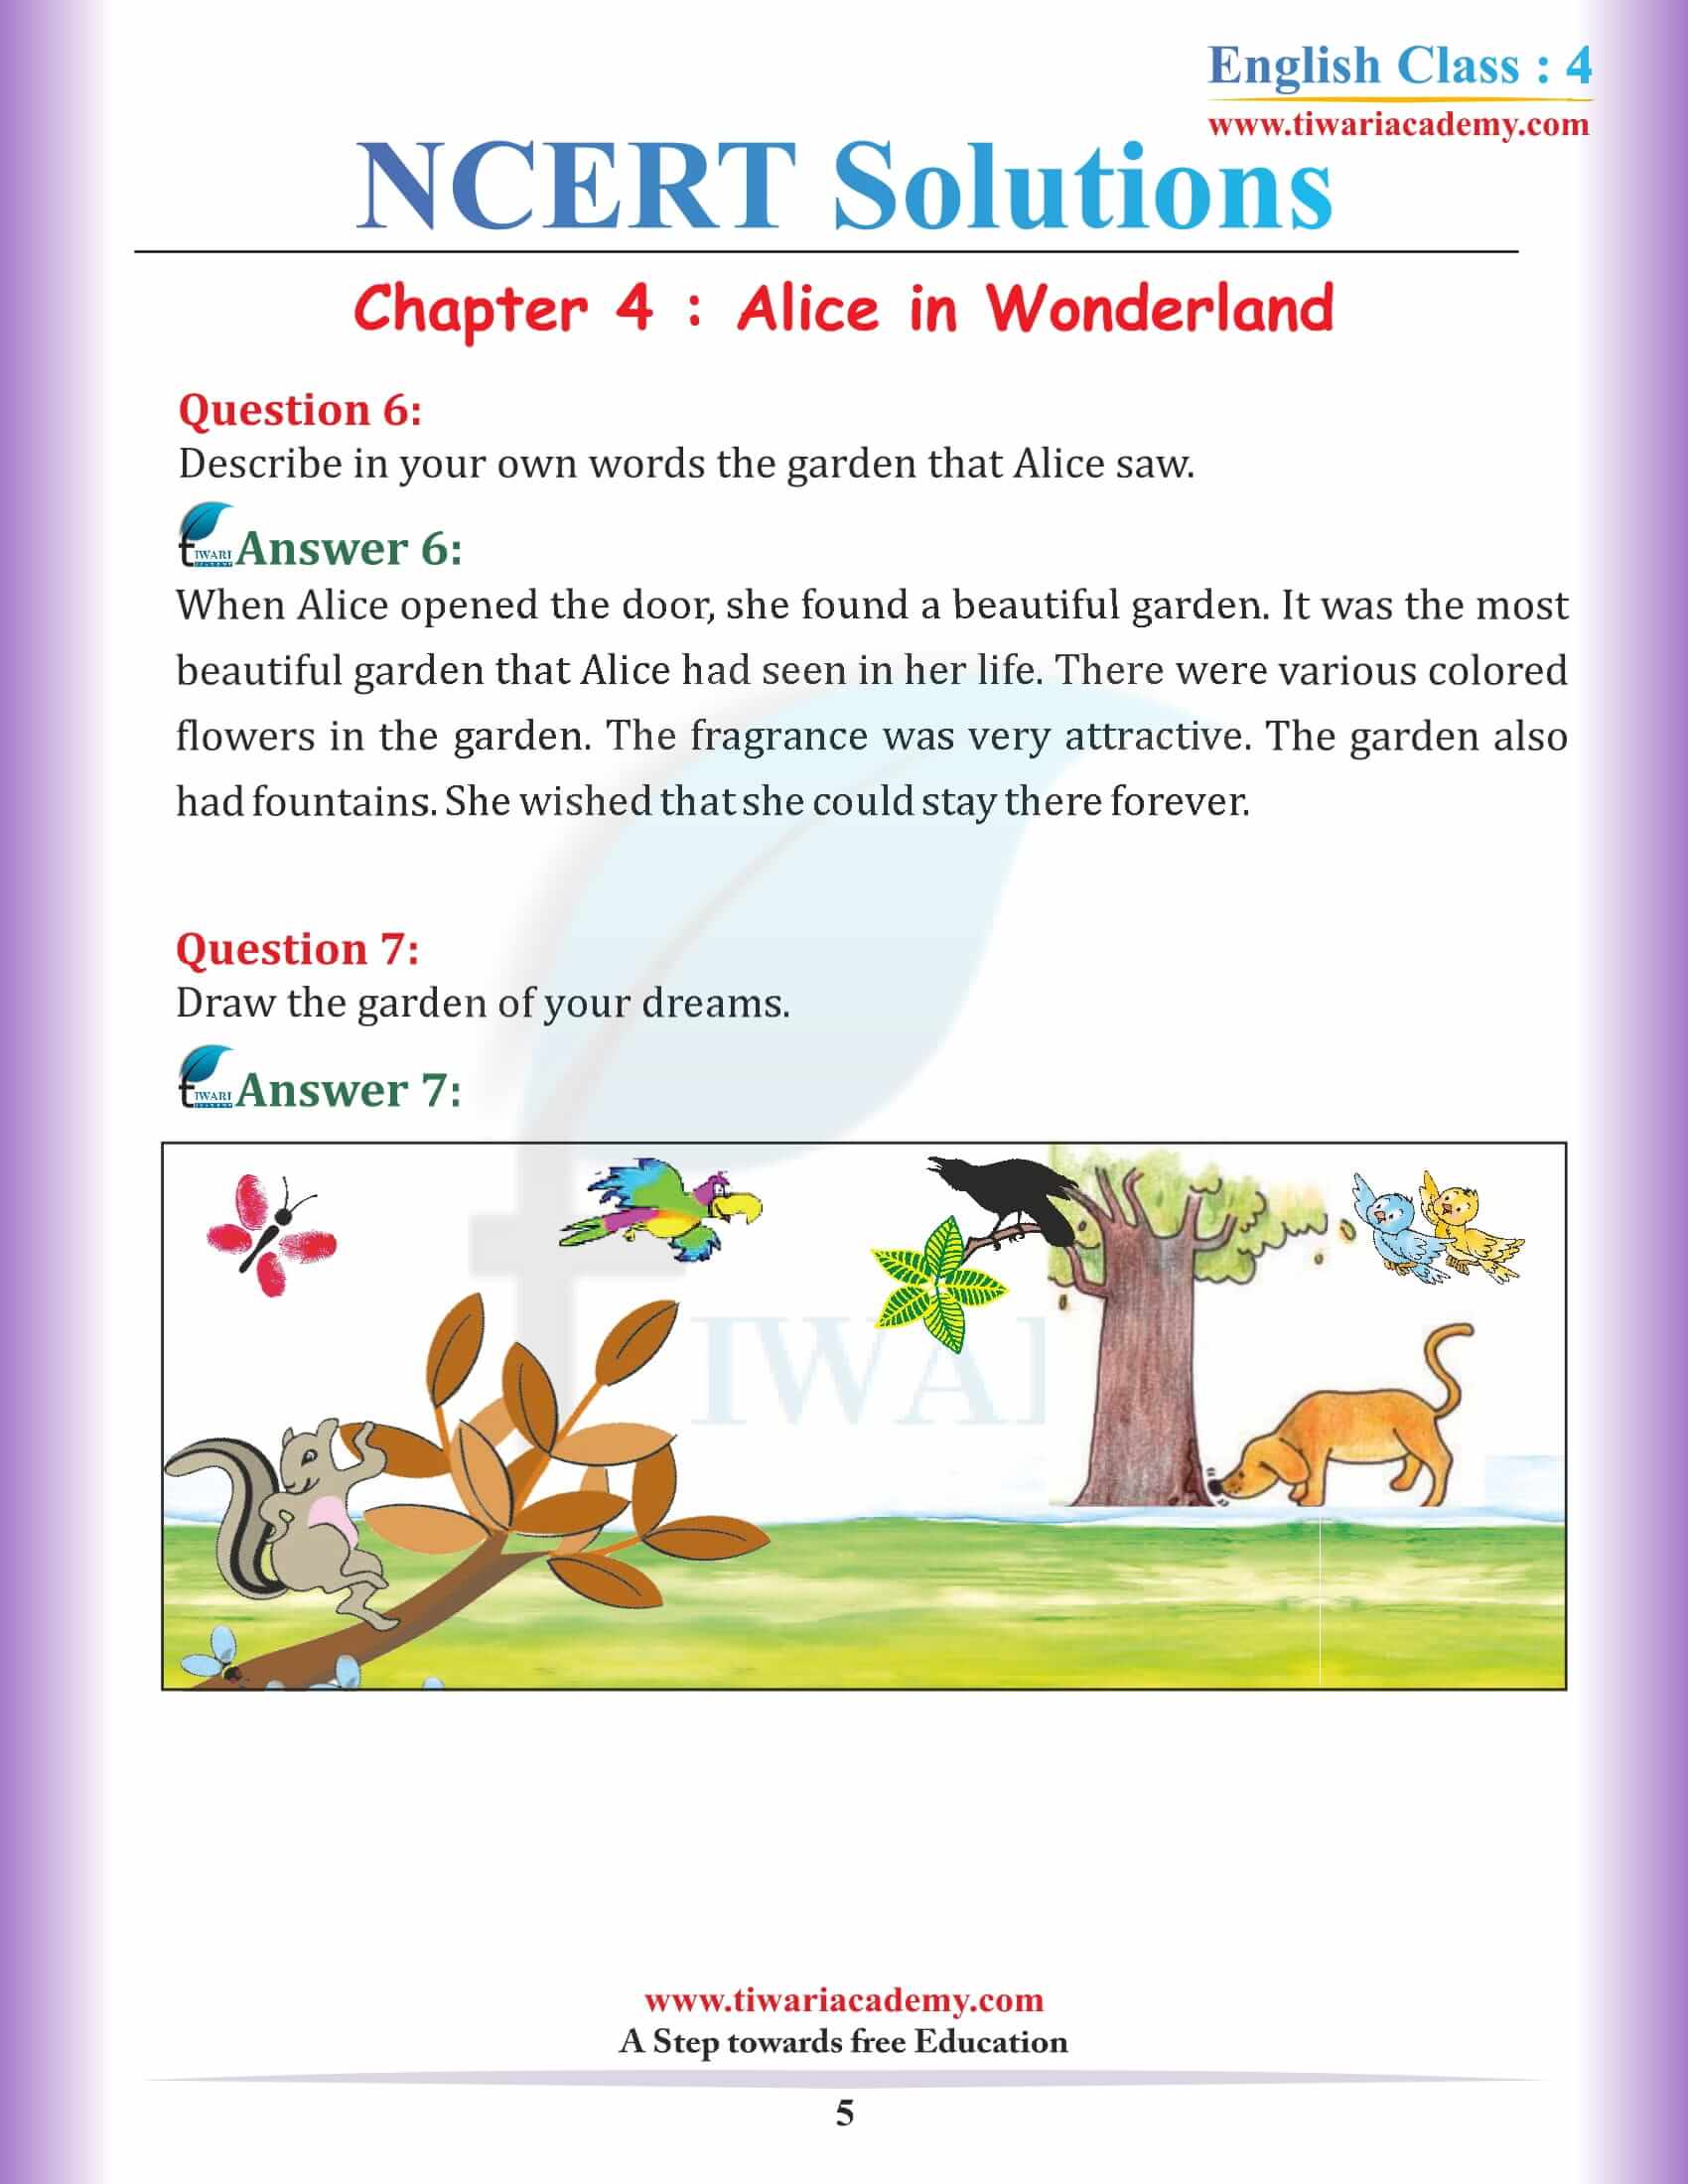 NCERT Solutions for Class 4 English Unit 4